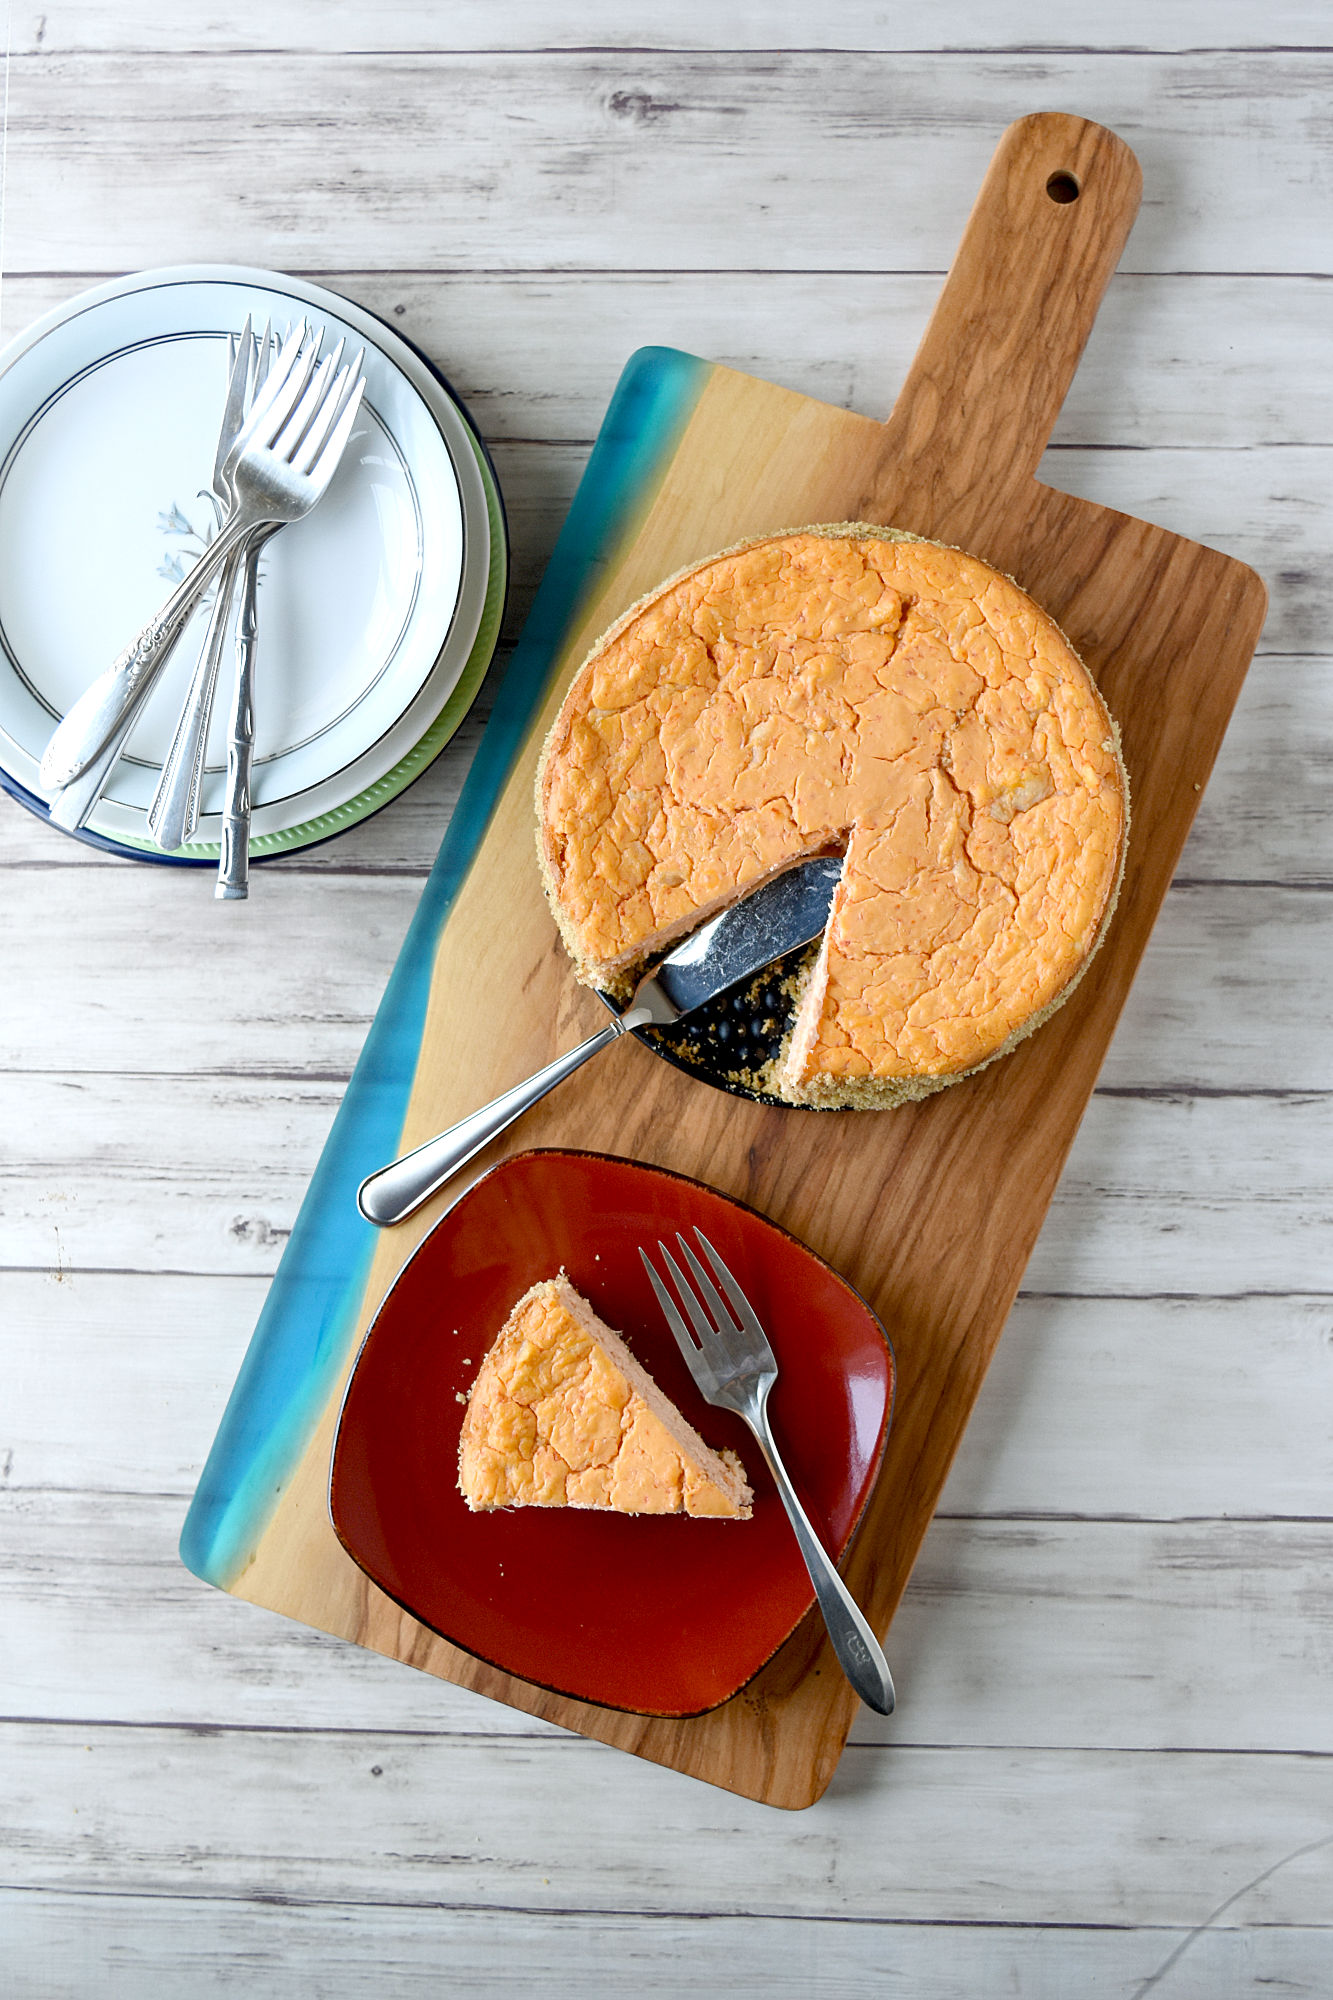 Roasted Red Pepper and Crab Savory Cheesecake has few ingredients, but still delight your family and guests with it's flavor.  A savory cheesecake is perfect for an appetizer or a light meal with a salad. #FallFlavors